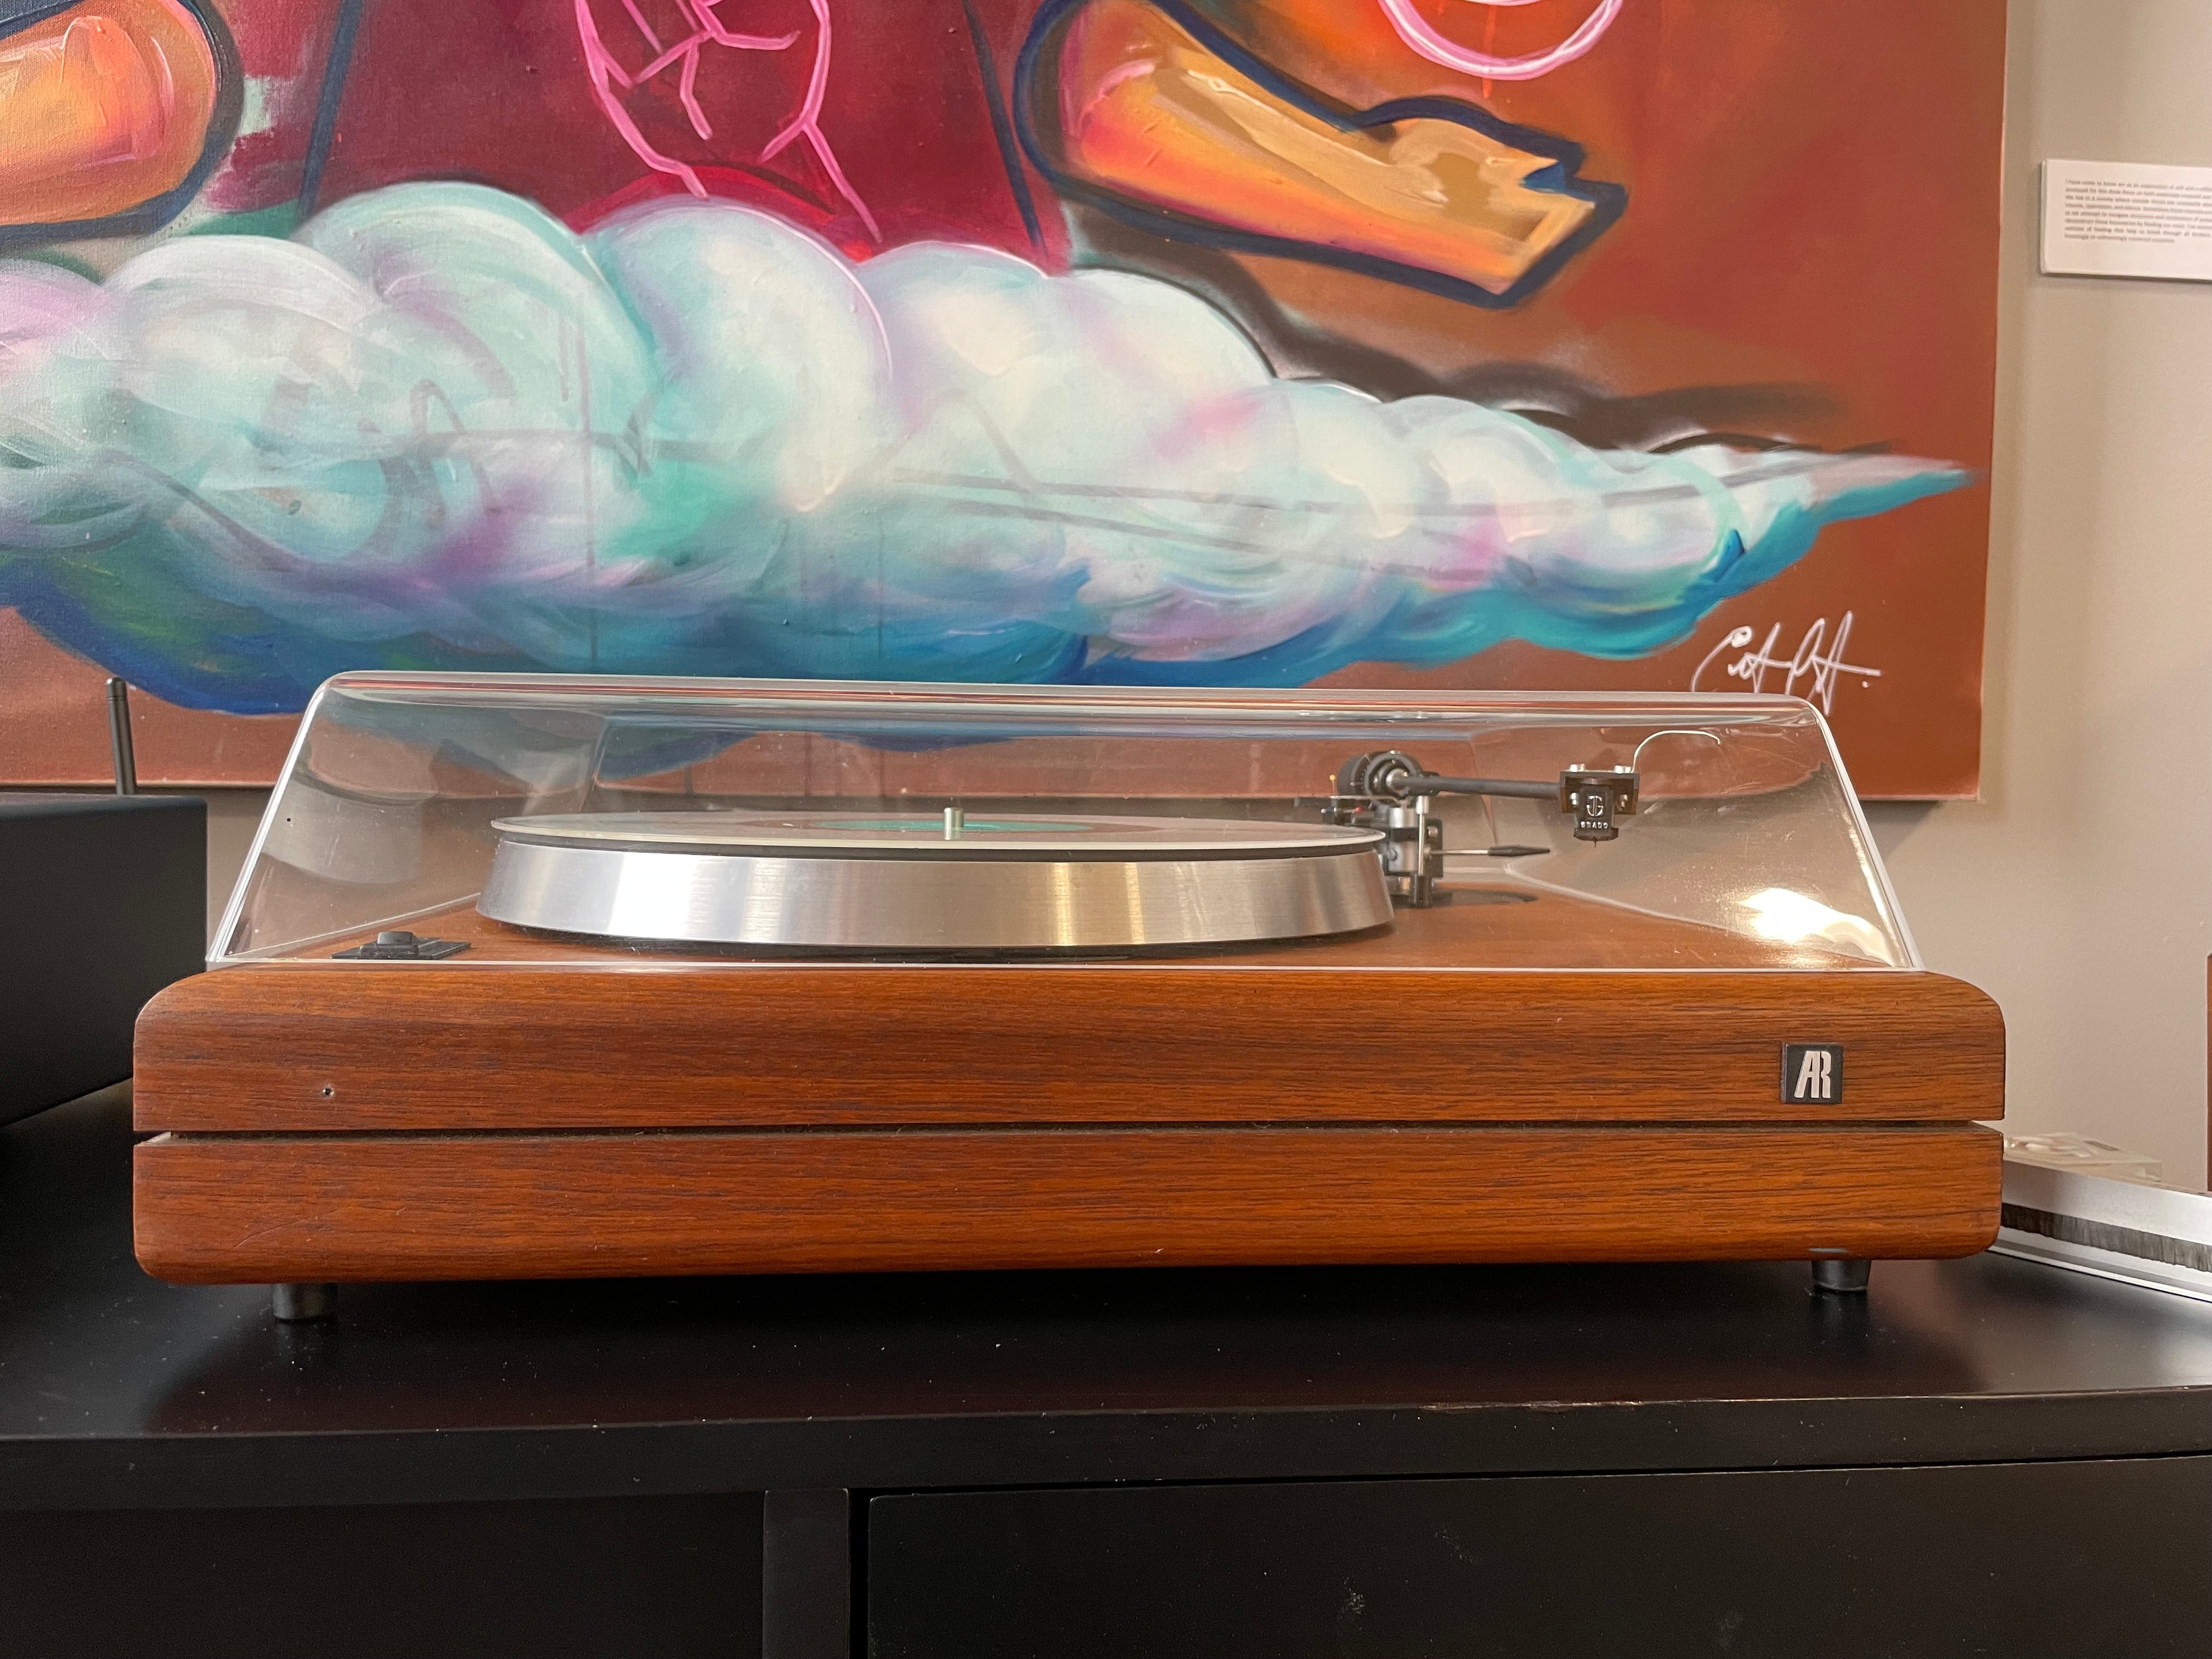 Acoustic Research "The Turntable" with Grace 707 Tonearm - SOLD